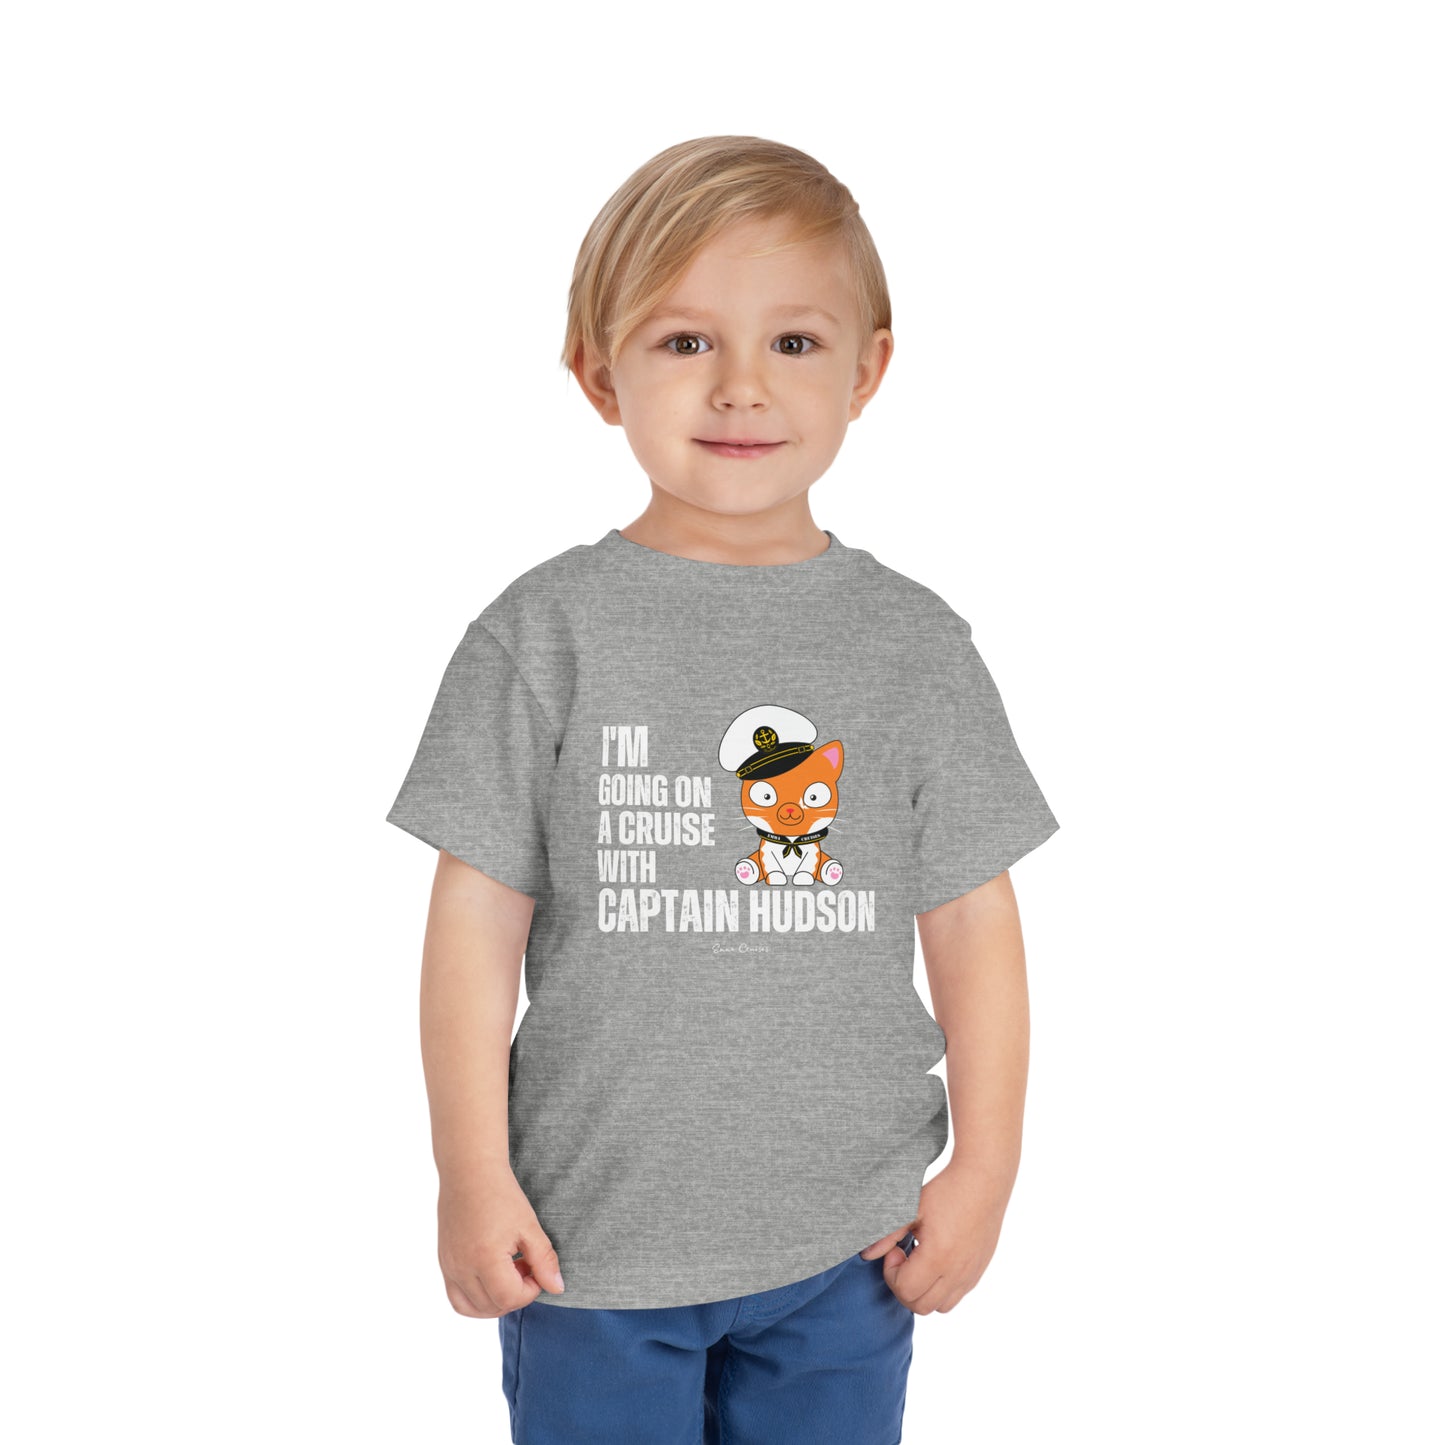 I'm Going on a Cruise With Captain Hudson - Toddler UNISEX T-Shirt